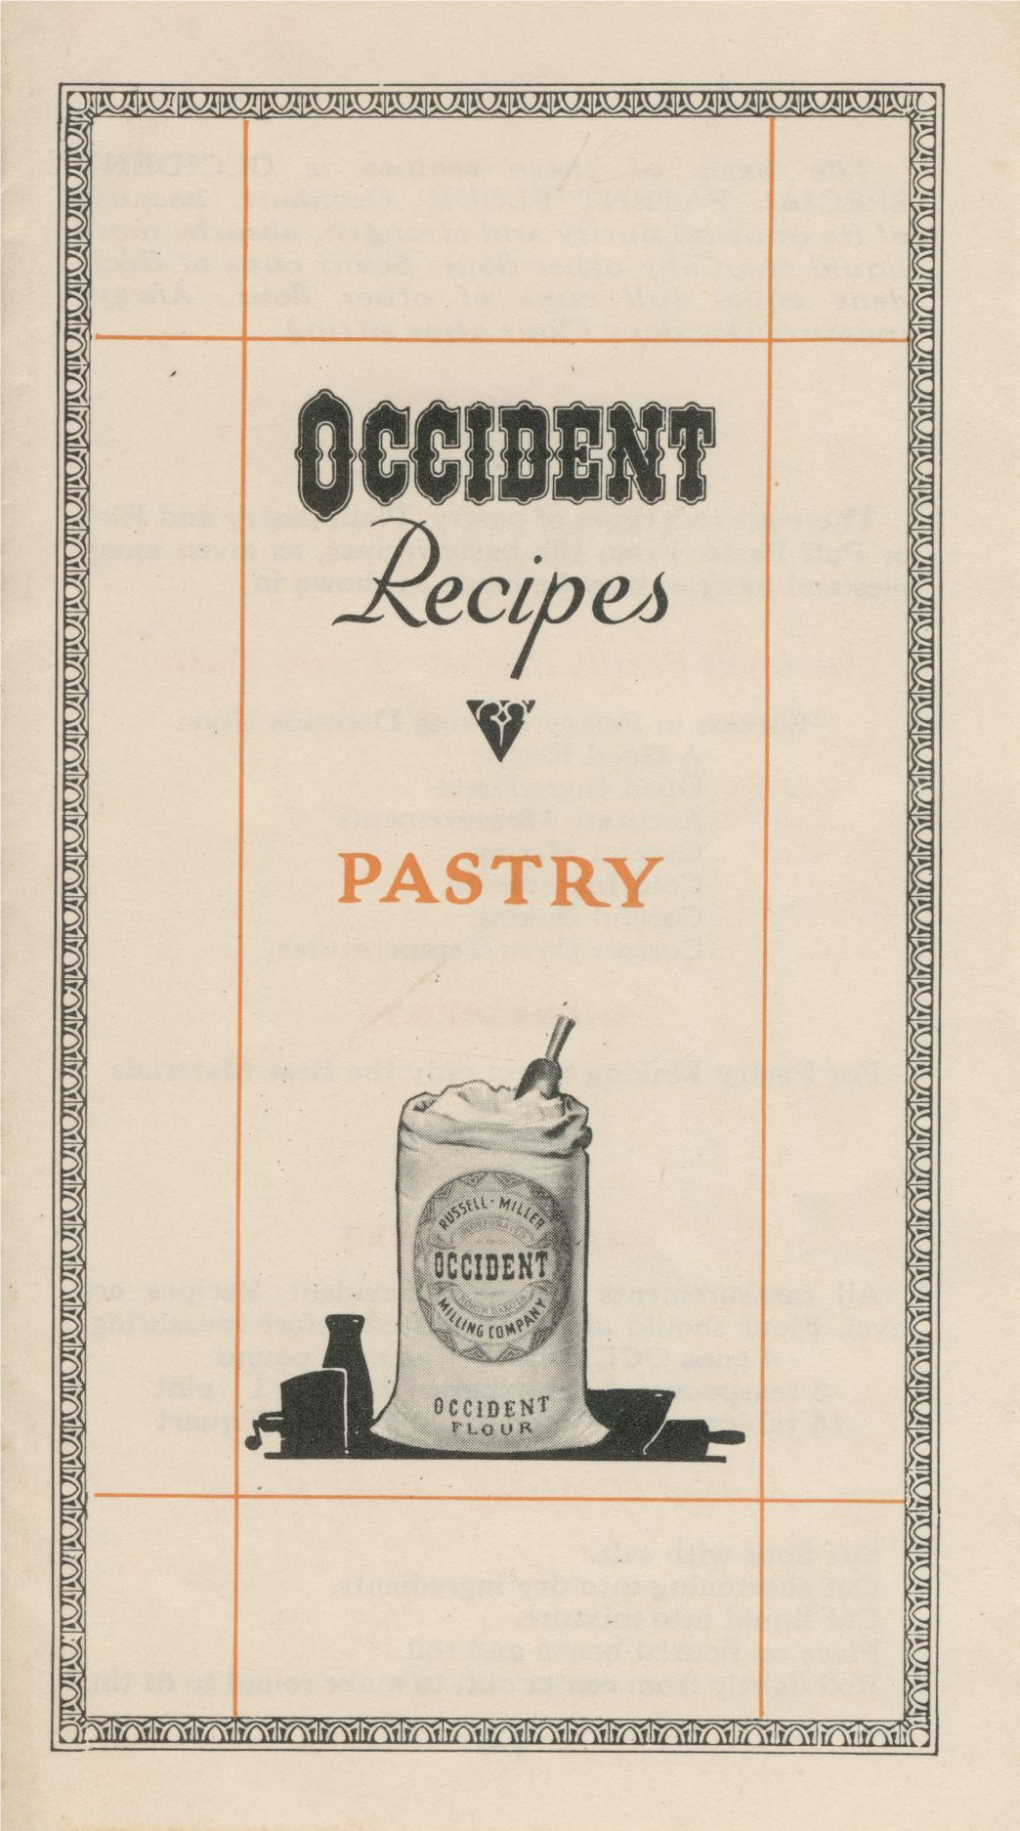 PASTRY the Basis of These Recipes Is OCCIDENT SPECIAL PATENT FLOUR